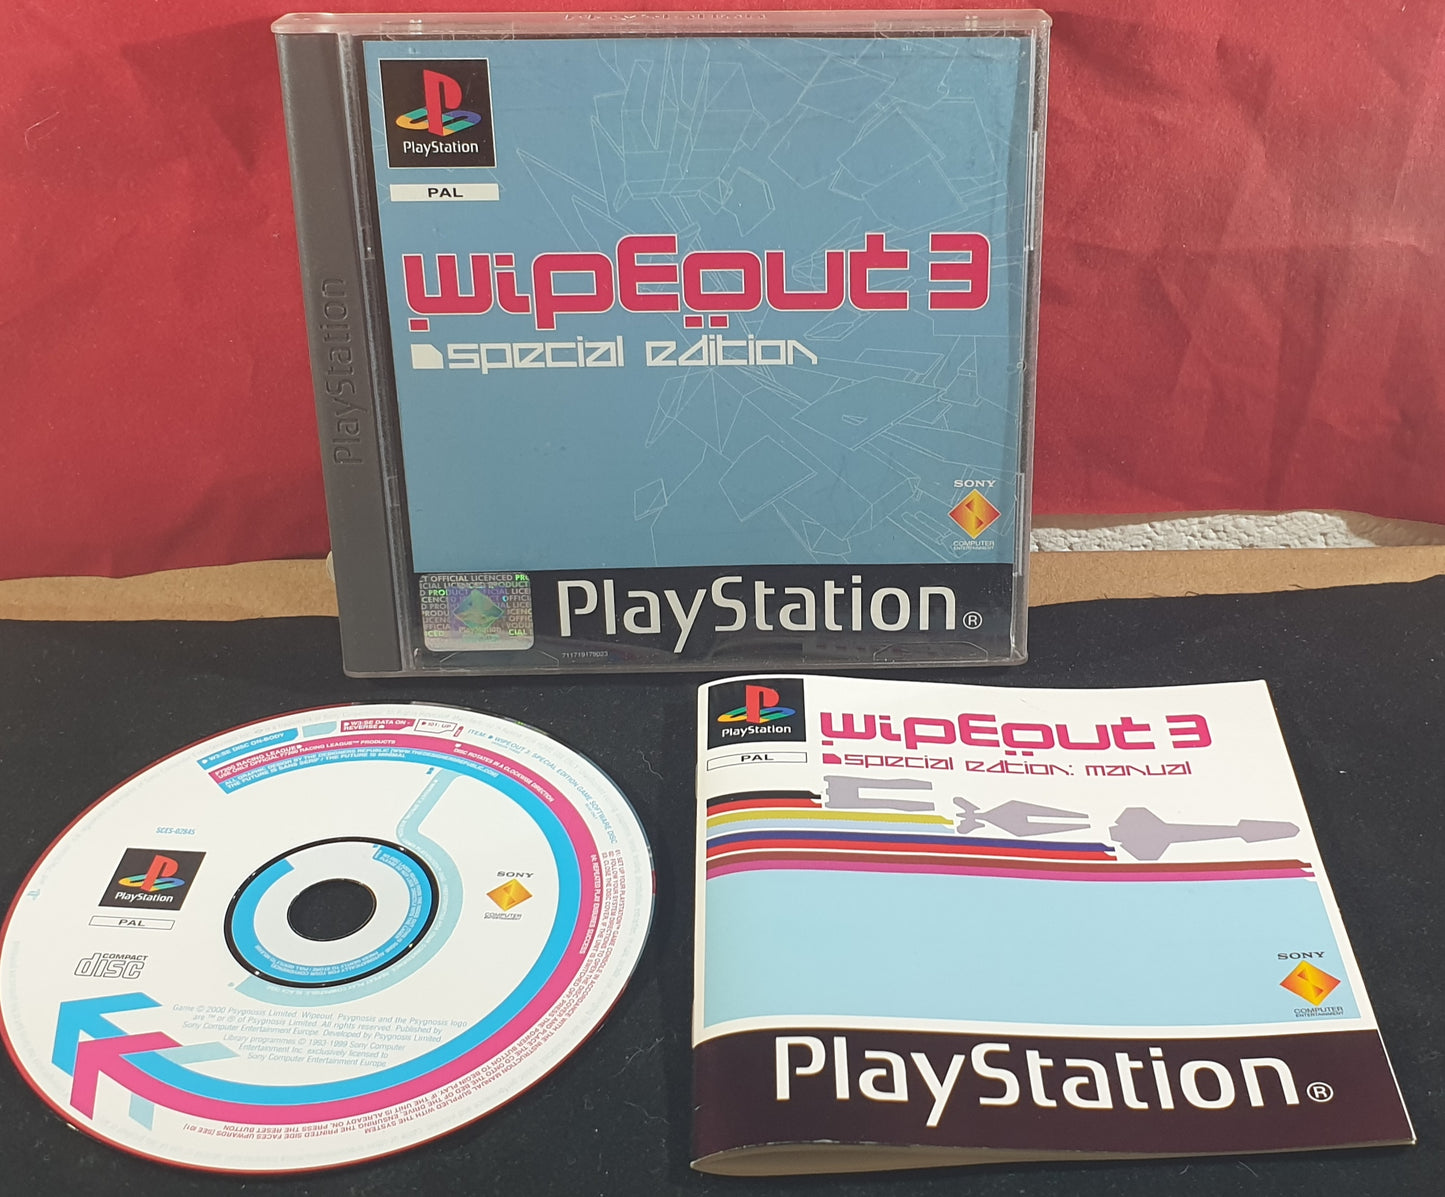 WipeOut 3 Special Edition Sony Playstation 1 (PS1) Rare Game